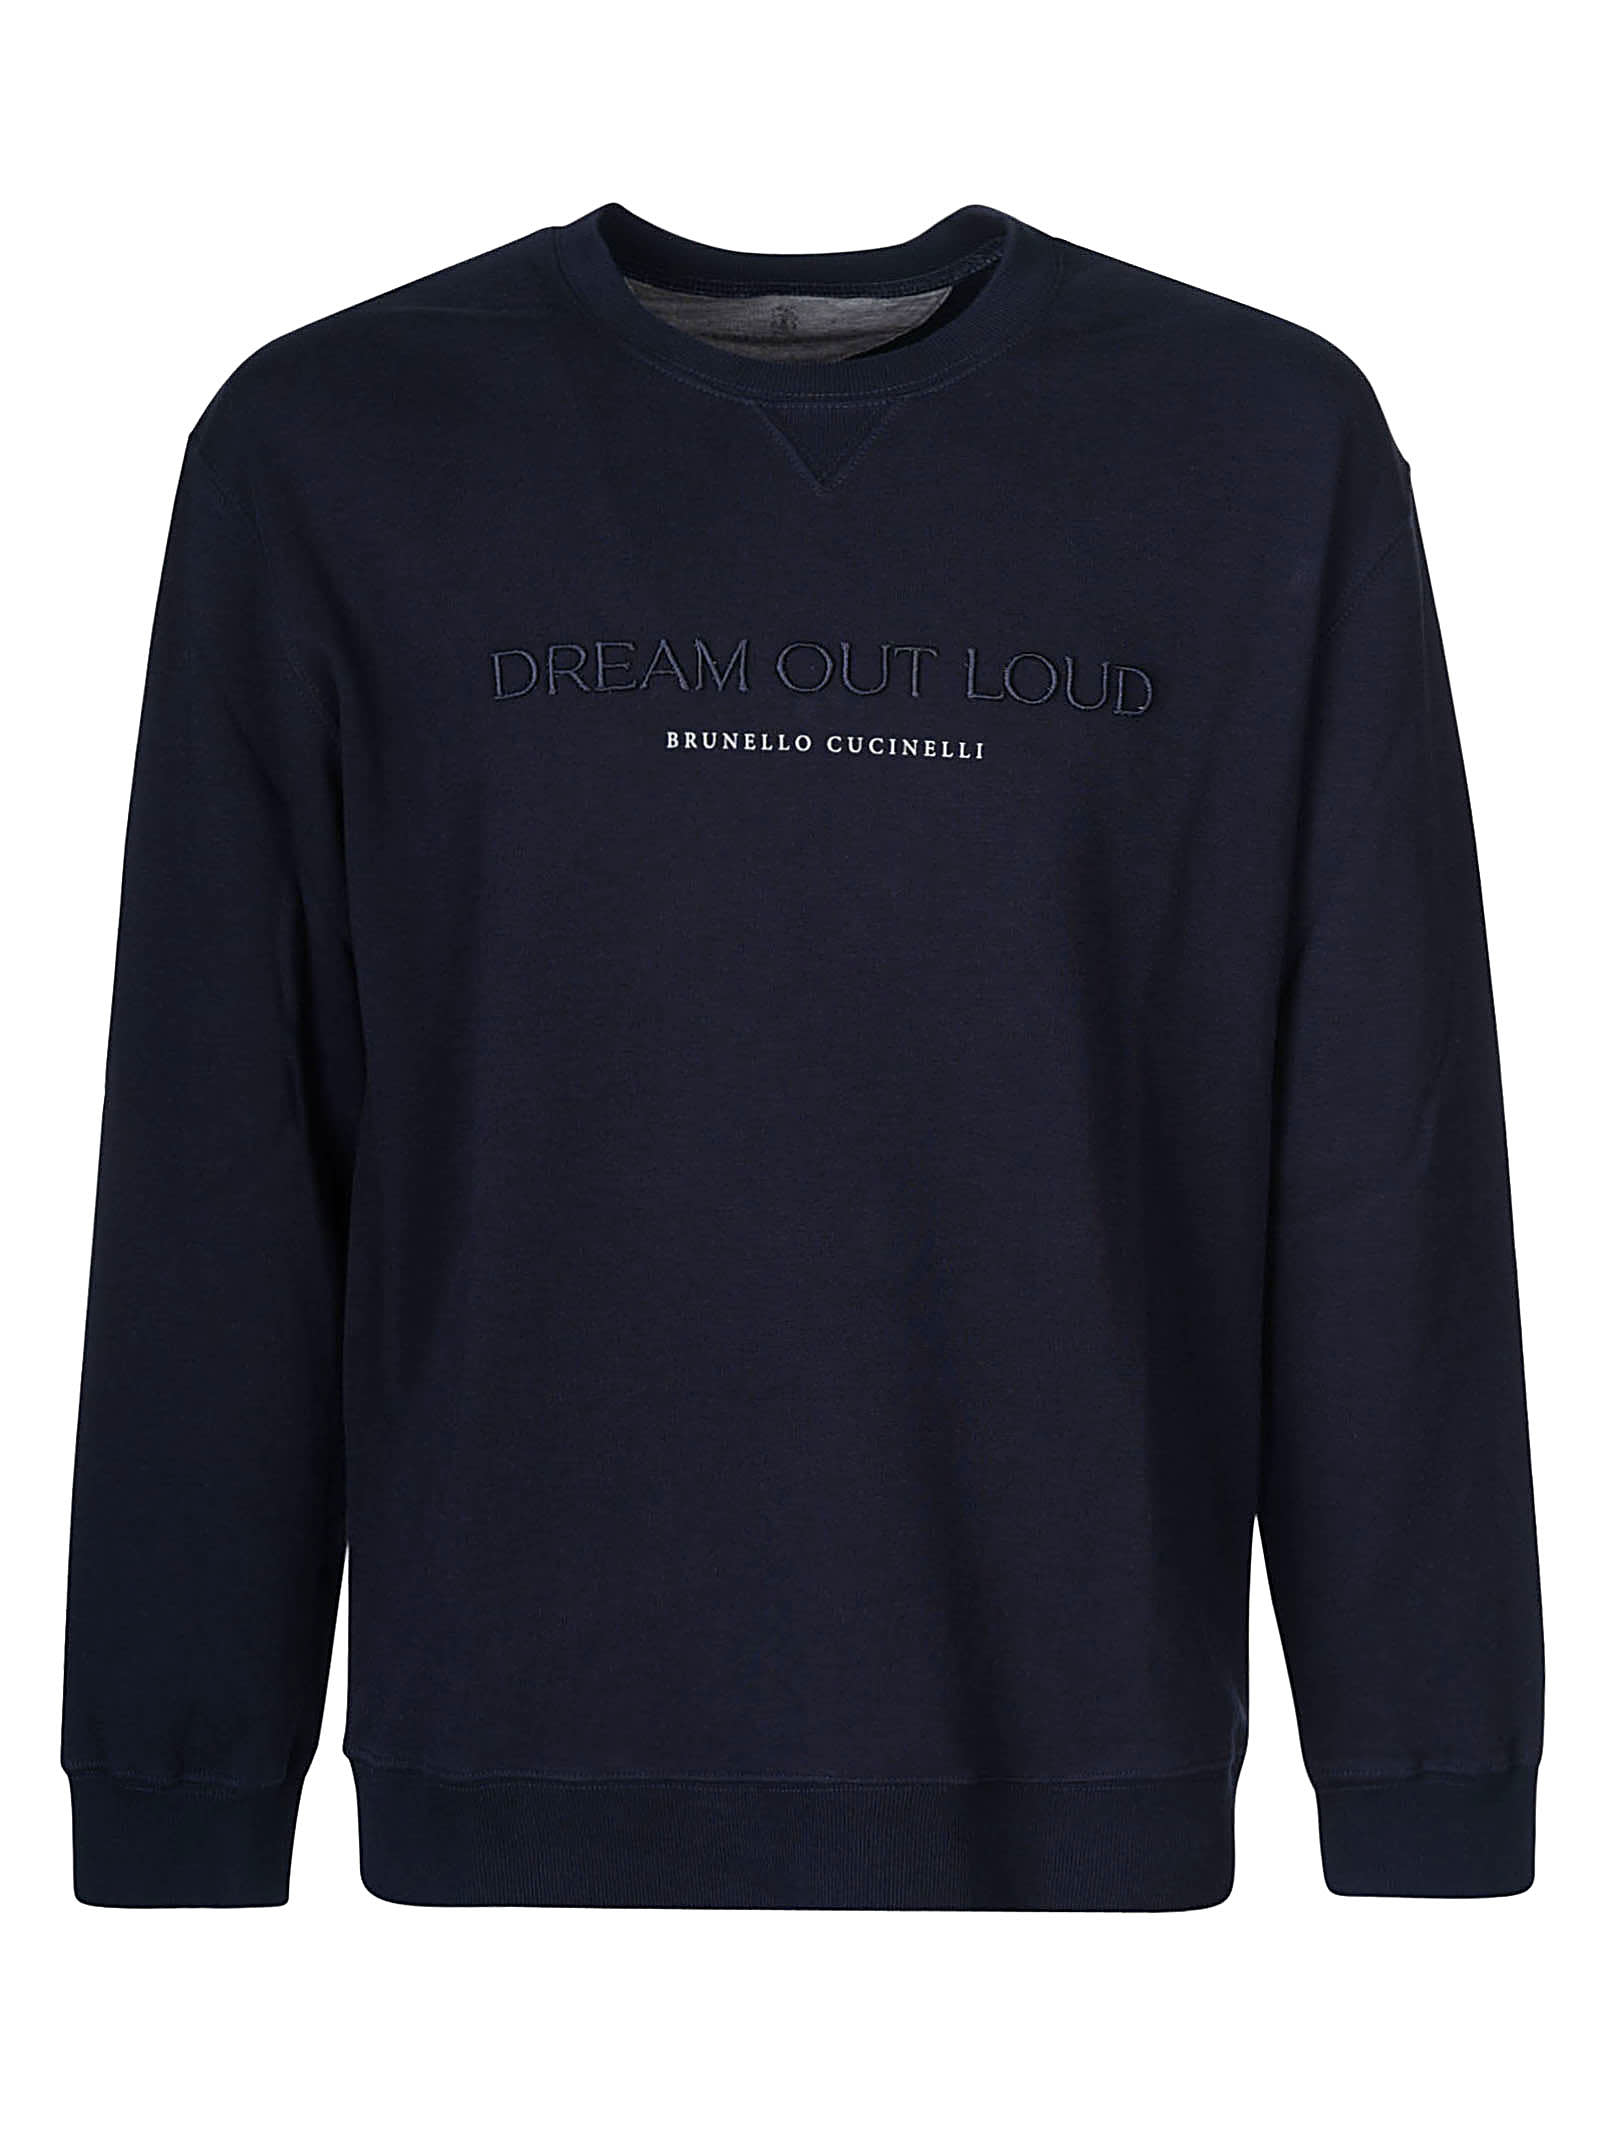 Brunello Cucinelli Dream Out Loud Embroidered Sweatshirt